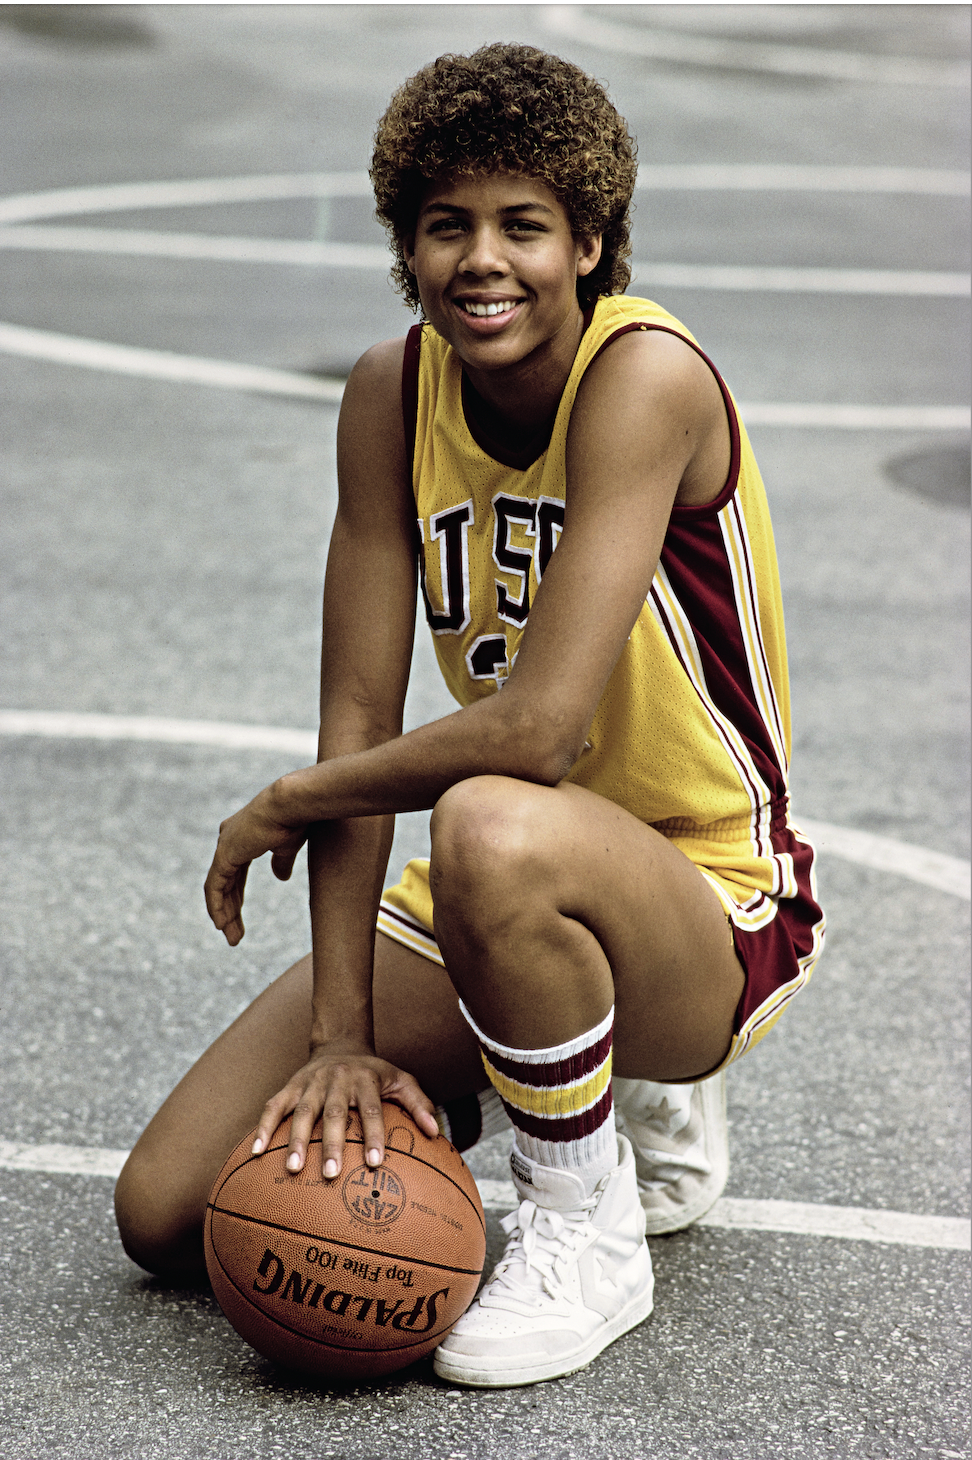 The Hall of Famers Who Helped Pave the Way Long Before the WNBA—from Cheryl Miller to Nera White